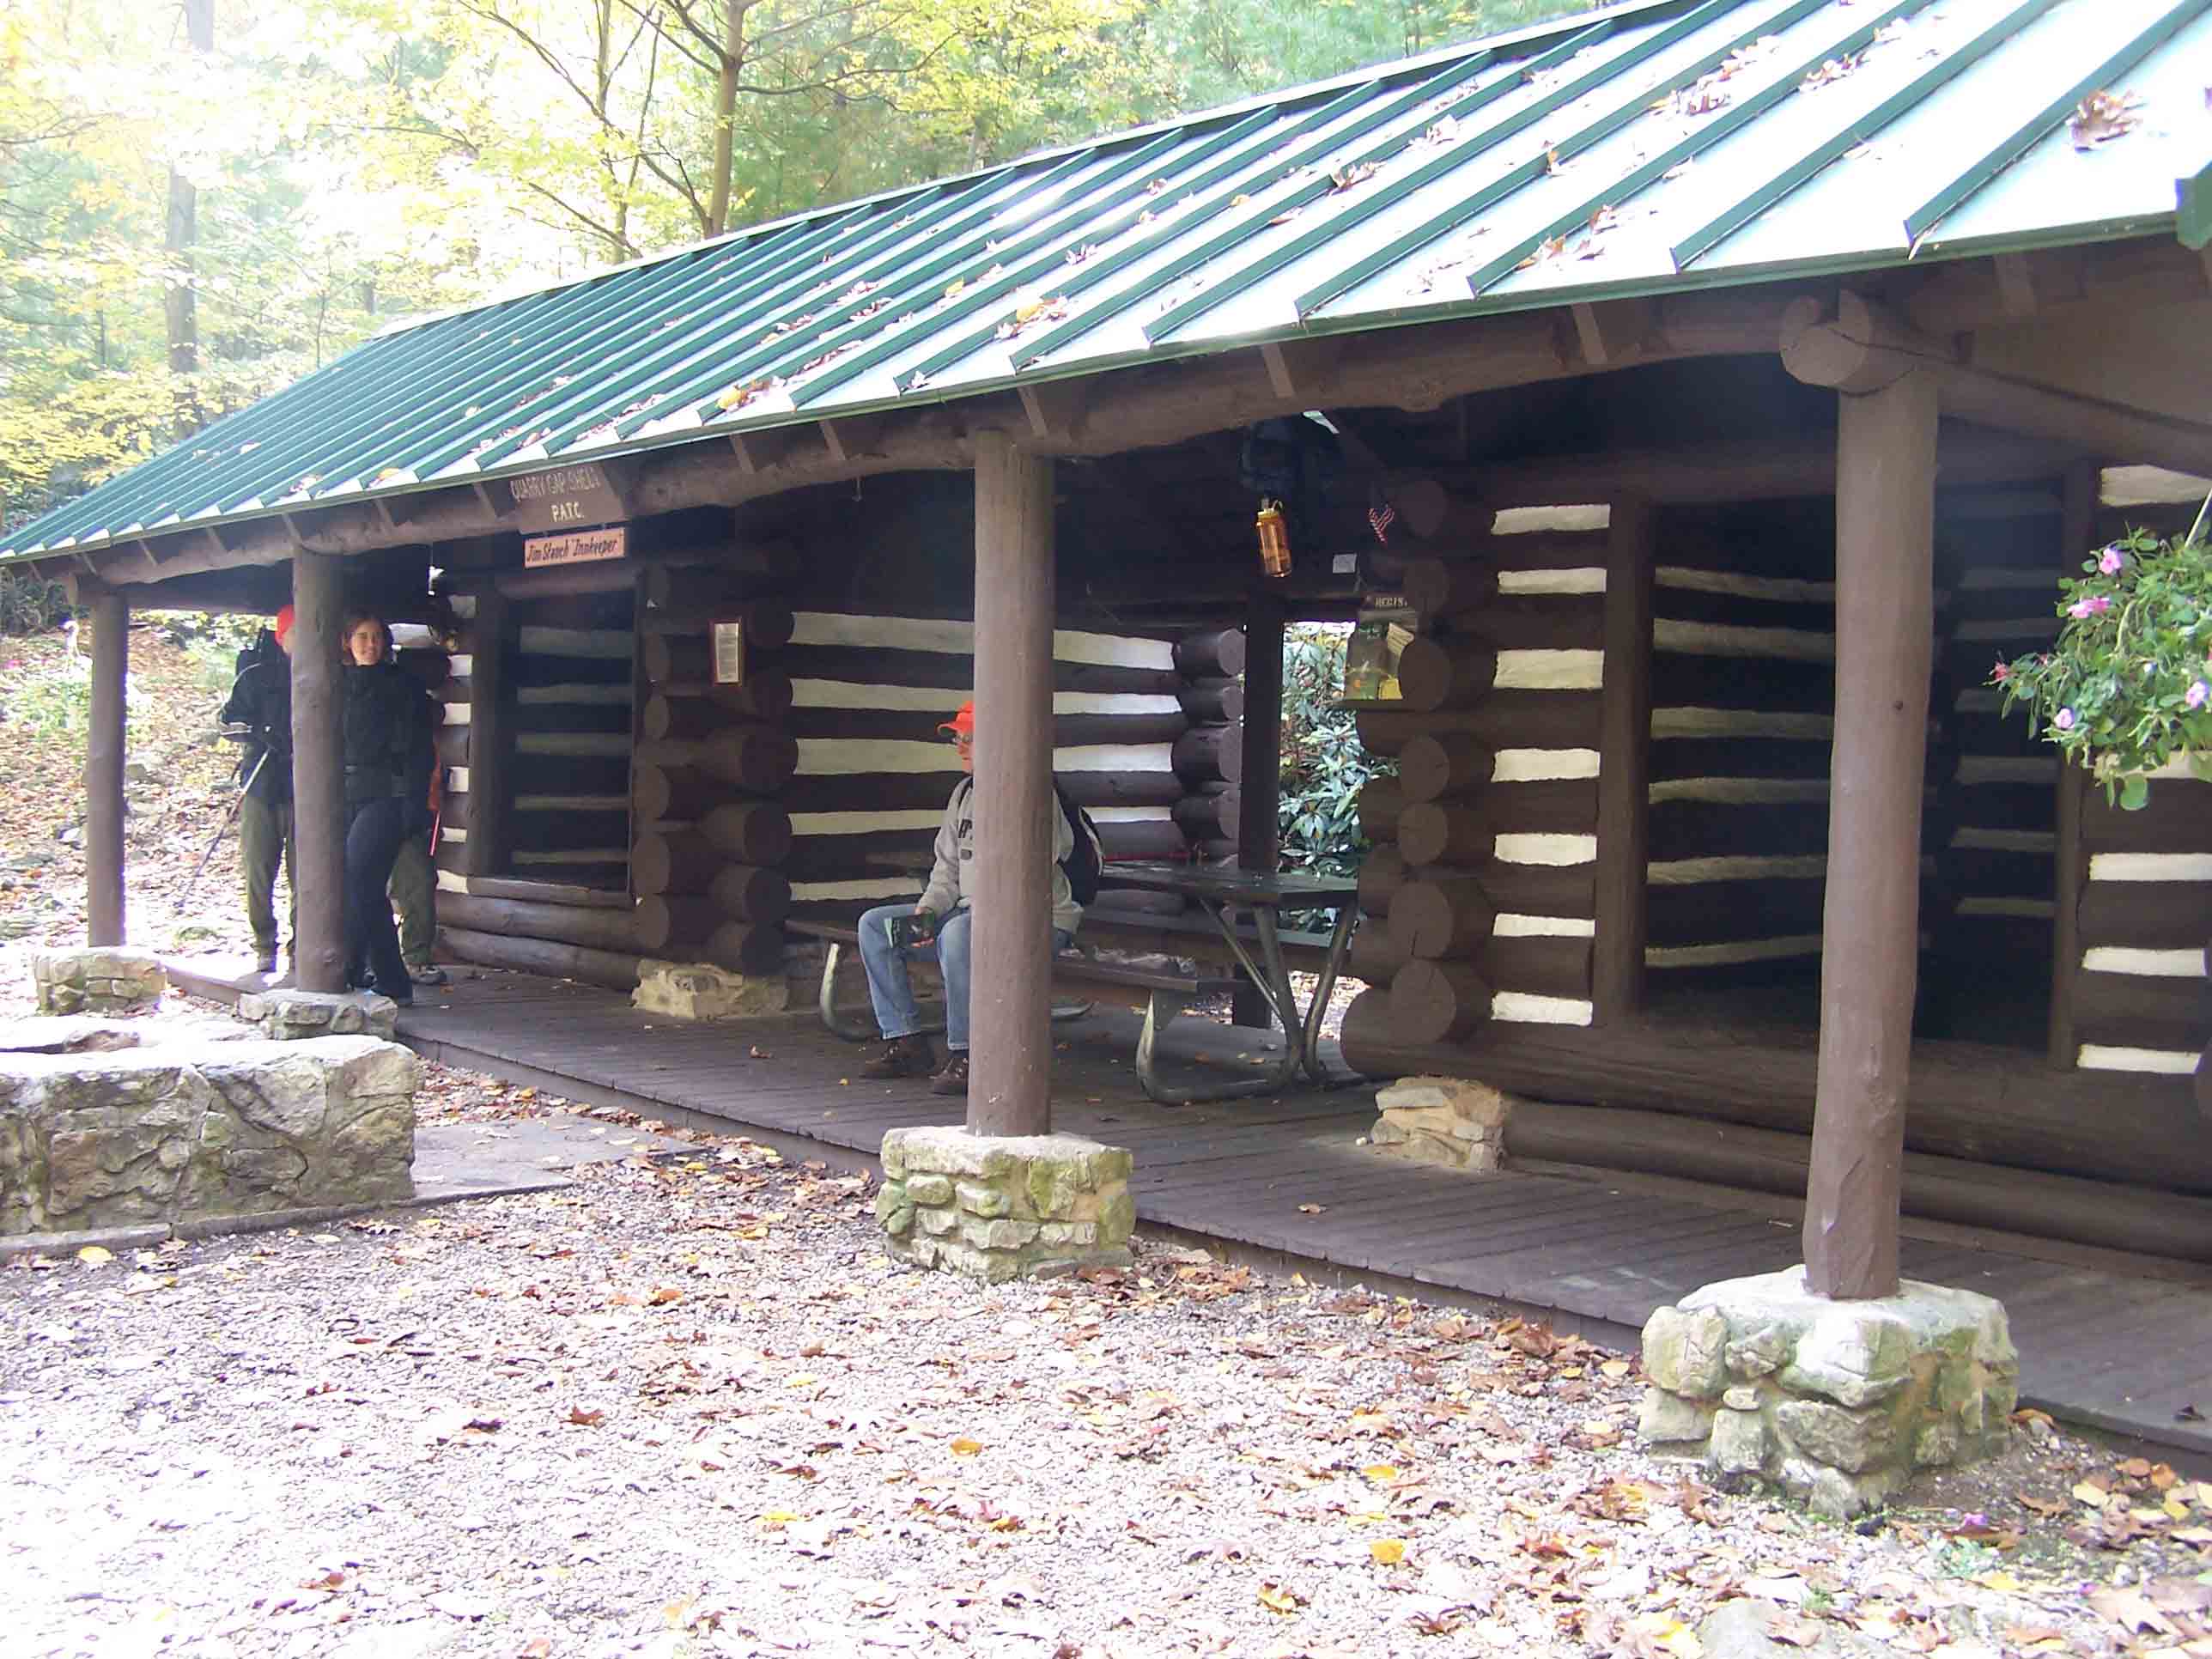 Quarry Gap Shelter mm 17. Courtesy at@rohland.org